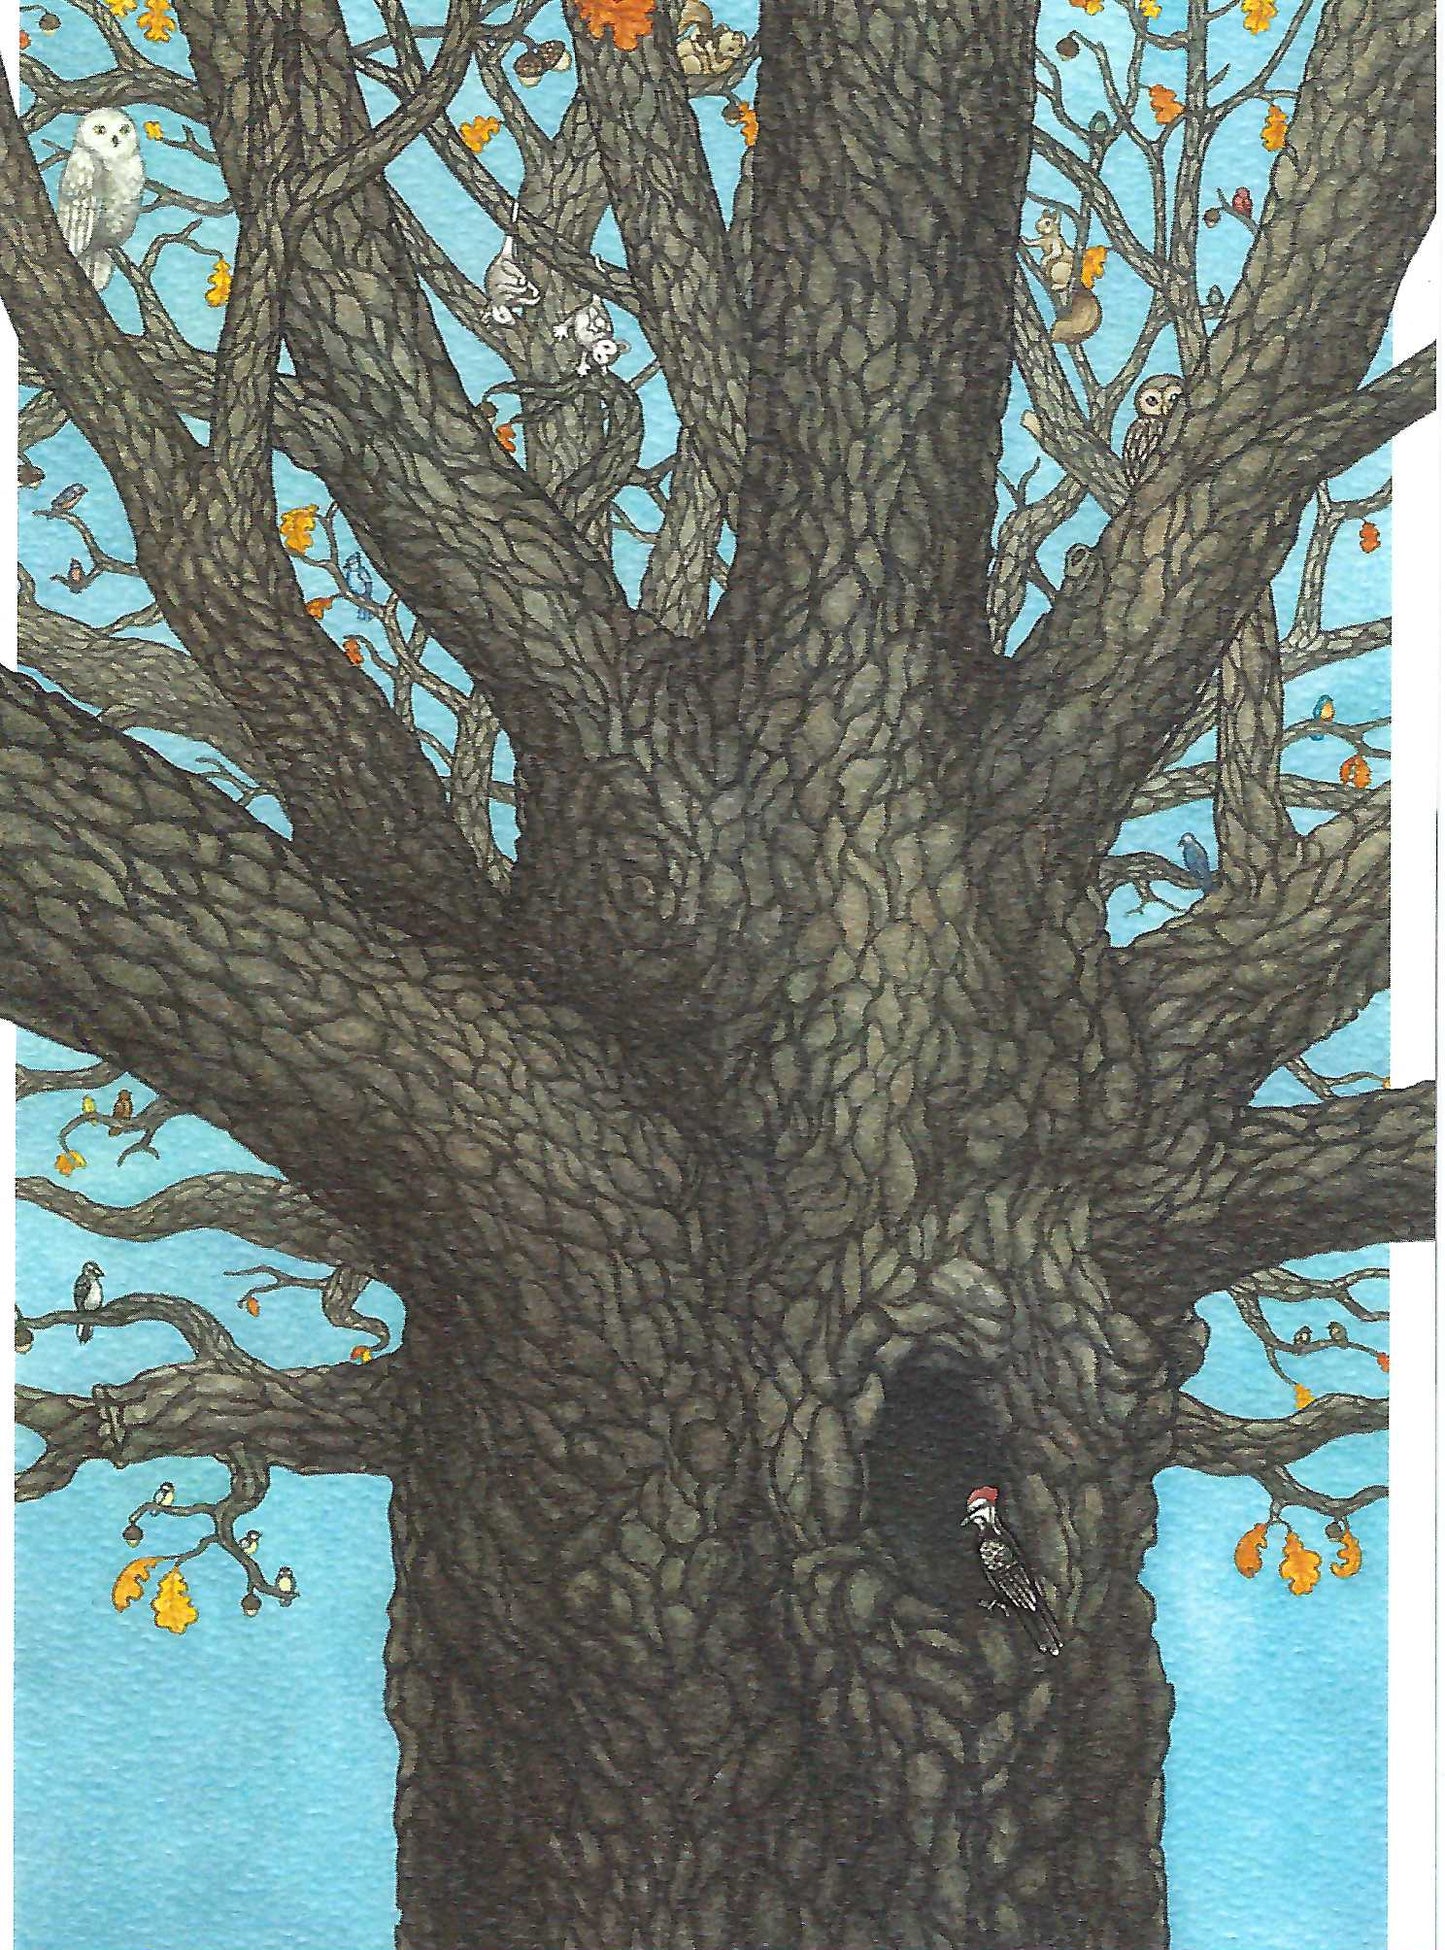 A casually elegant greeting card designed to be shared or displayed as a work of art.    Description  A whimsical watercolor illustration by Jessica Waterstradt from the book, "The Acorn and the Oak."  A complementary illustration is featured on the inside.